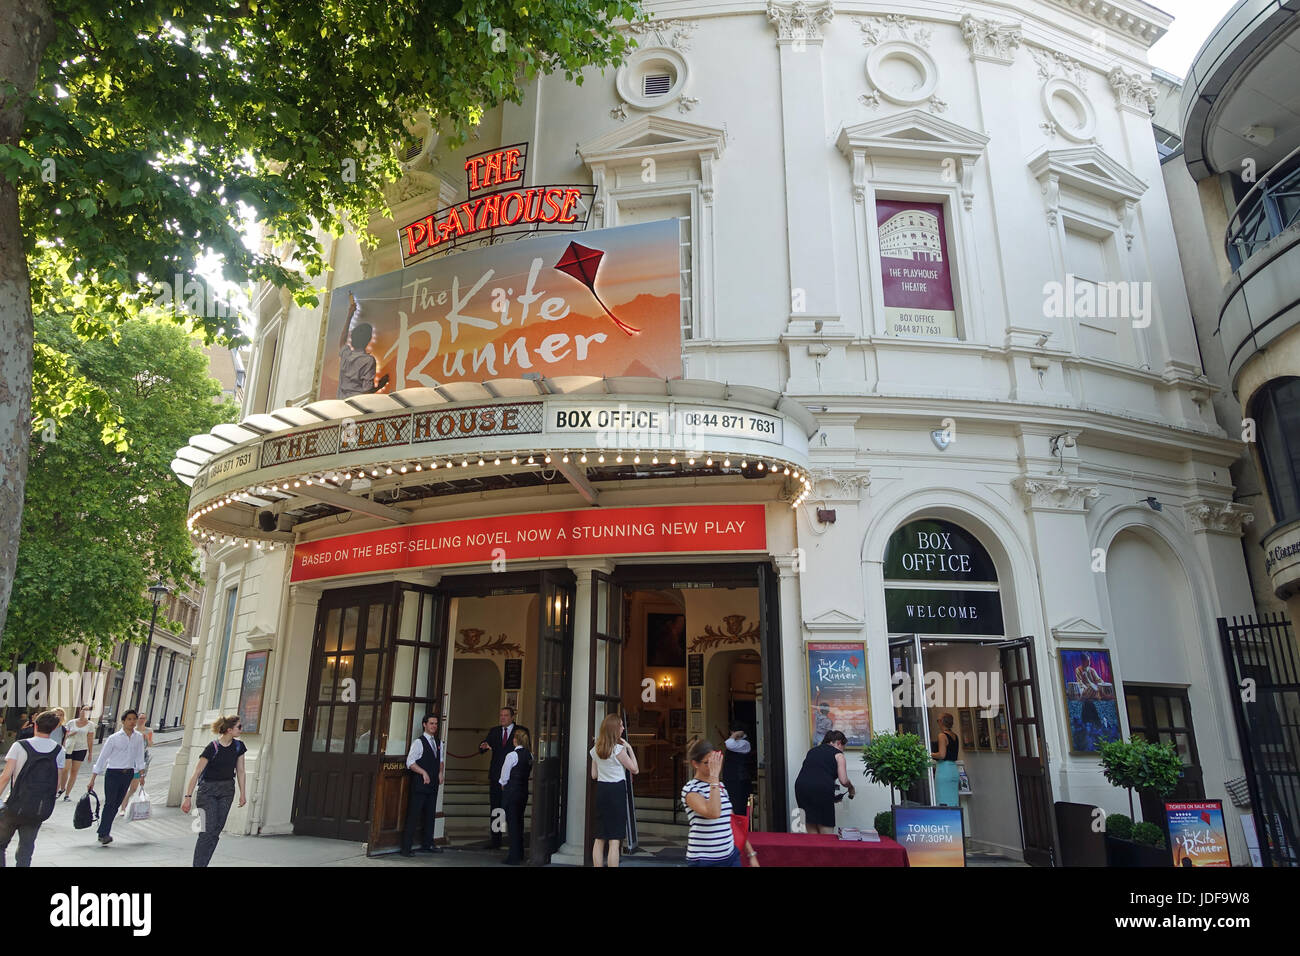 Front view of the entrance to The Playhouse Theatre in Craven Street London UK Stock Photo